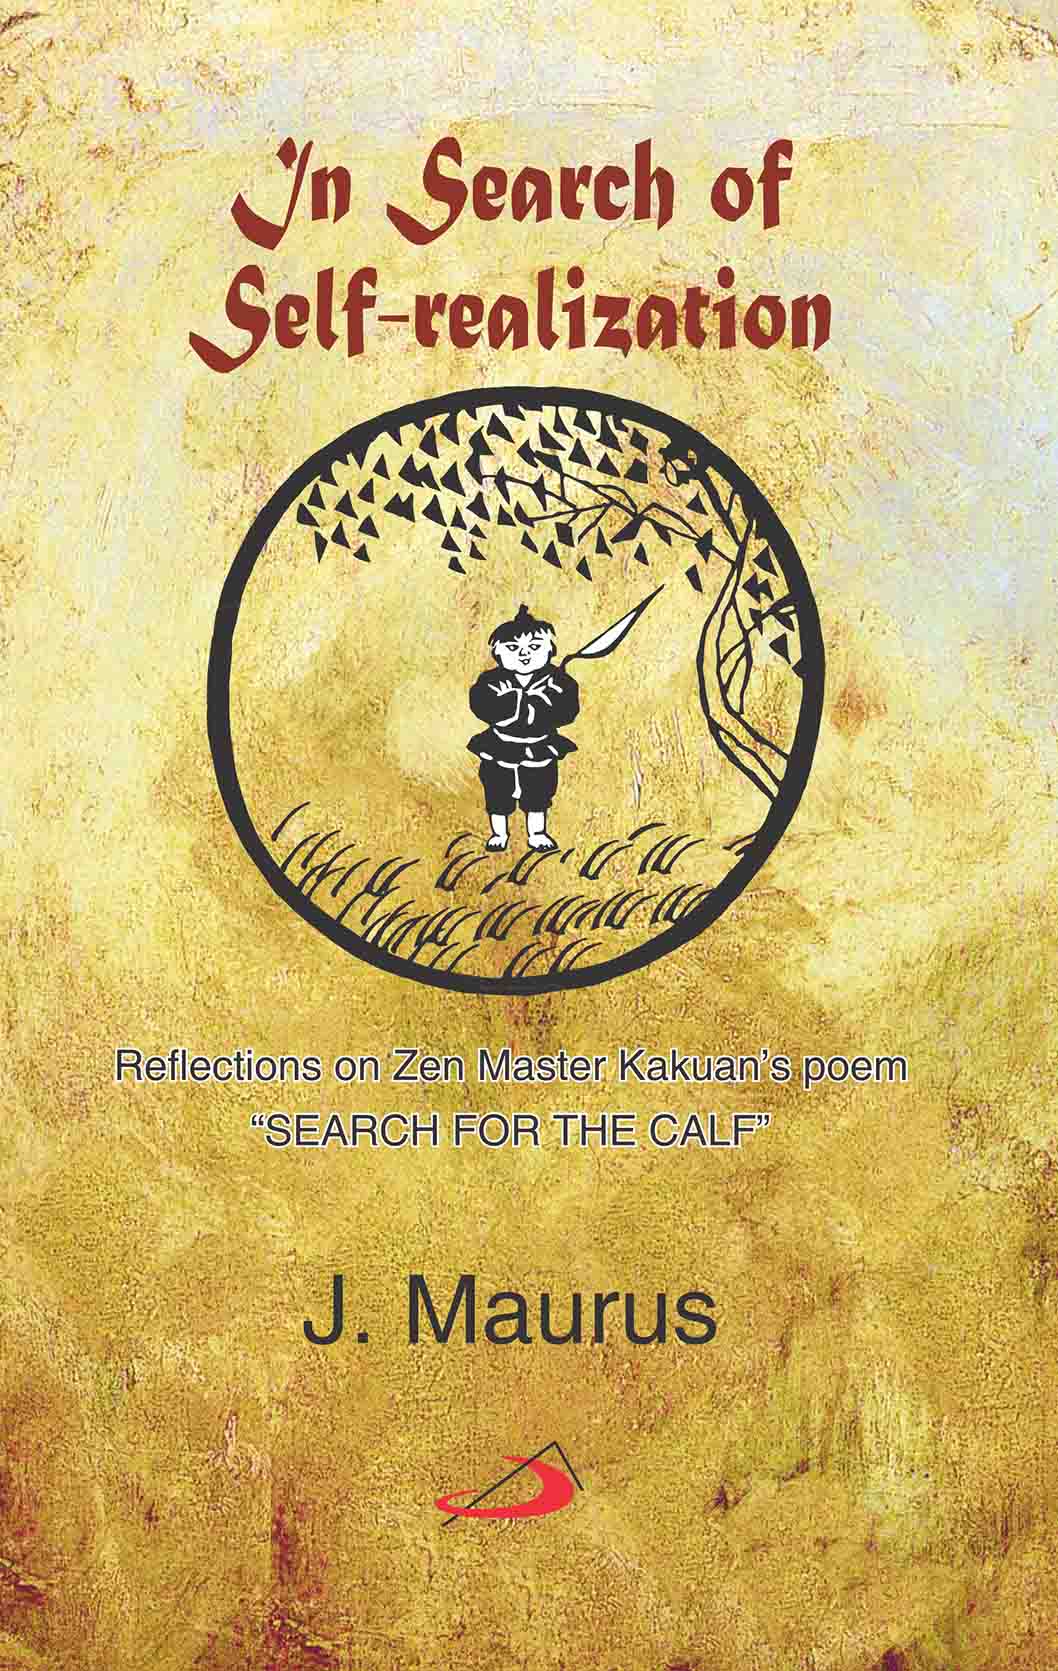 in search of self